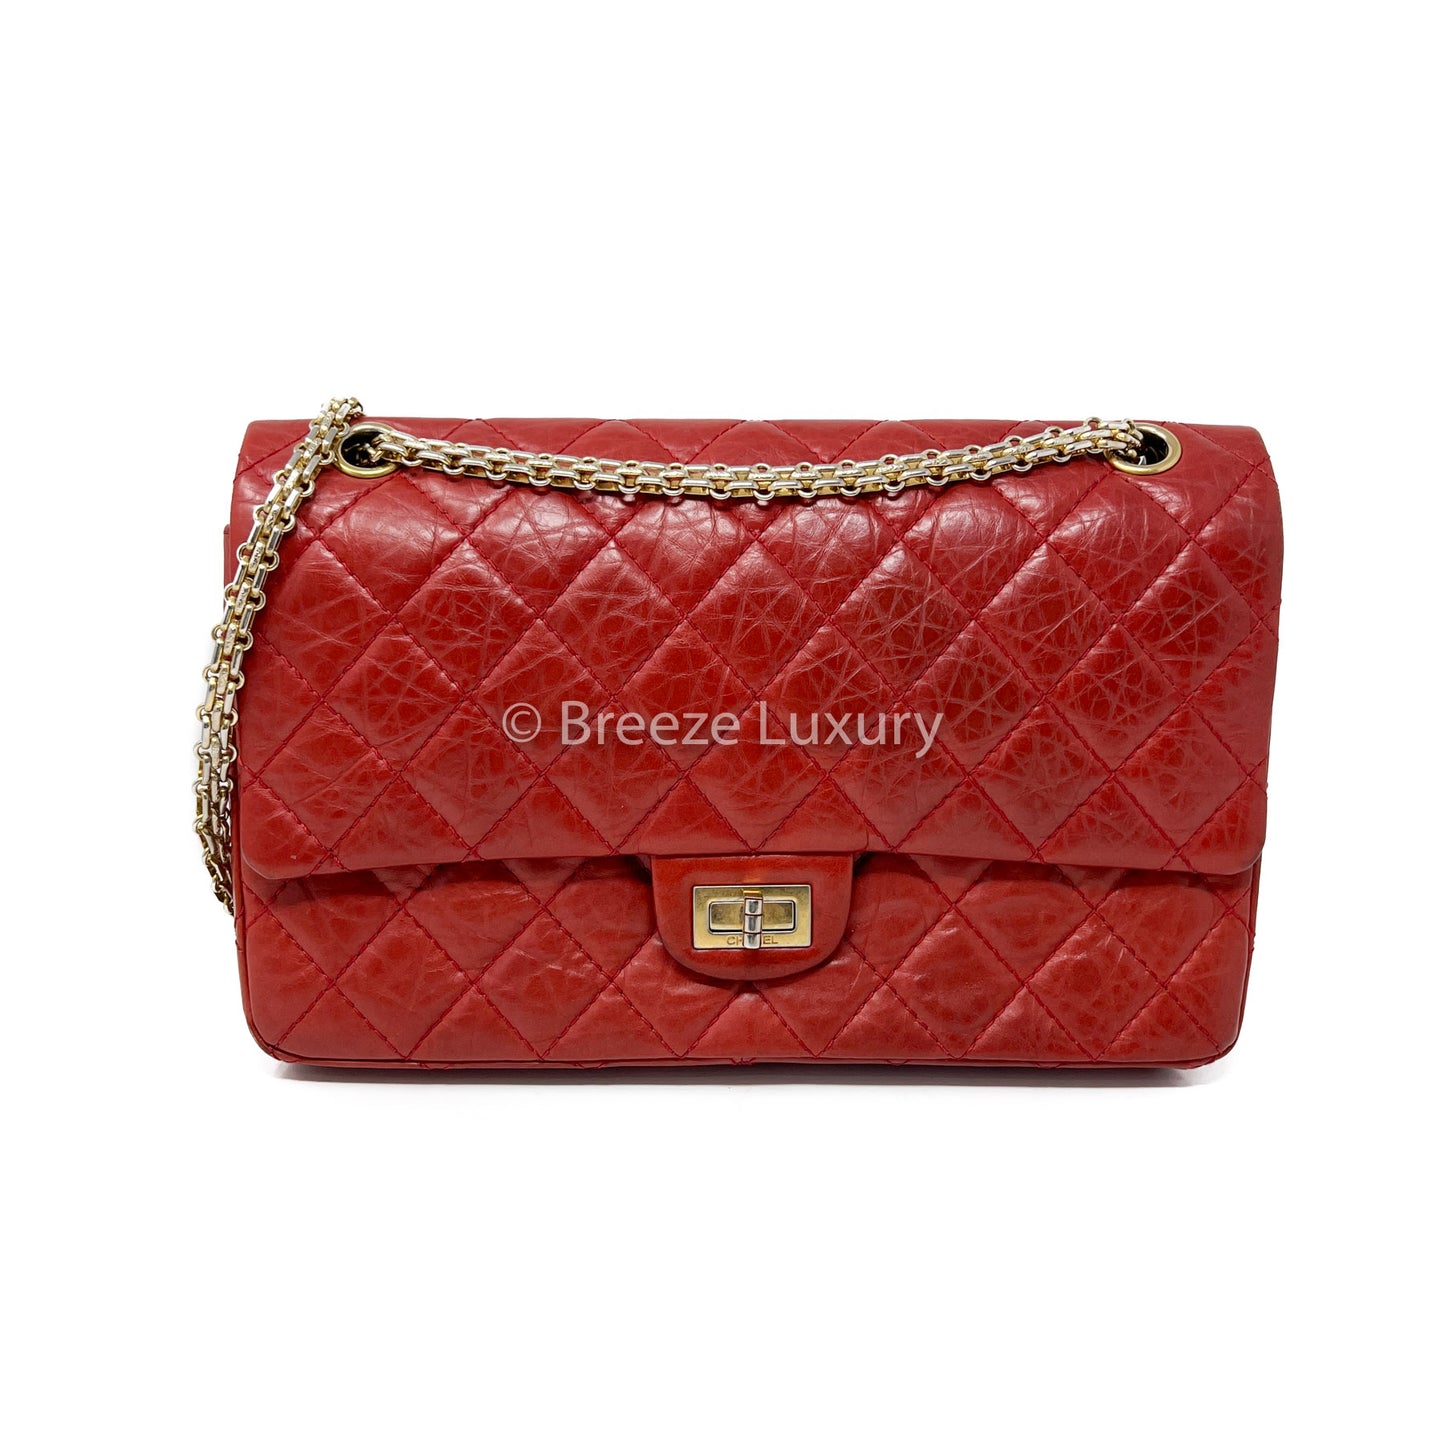 Chanel 2.55 Reissue GHW Quilted Classic Double Flap Bag (Size 226)